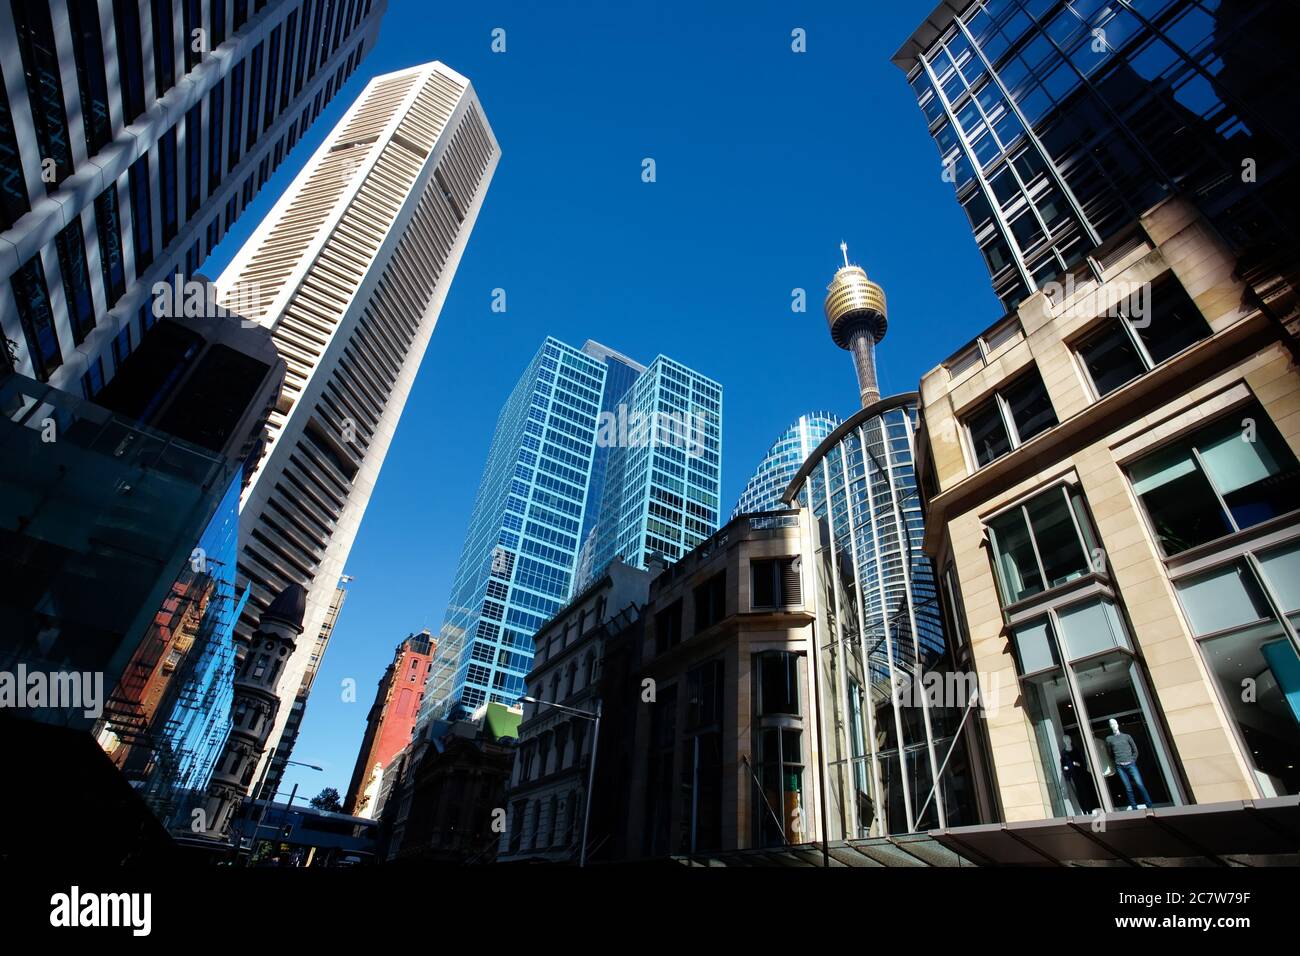 The central business district of Sydney with modern skyscrapers and the Sydney Tower Stock Photo